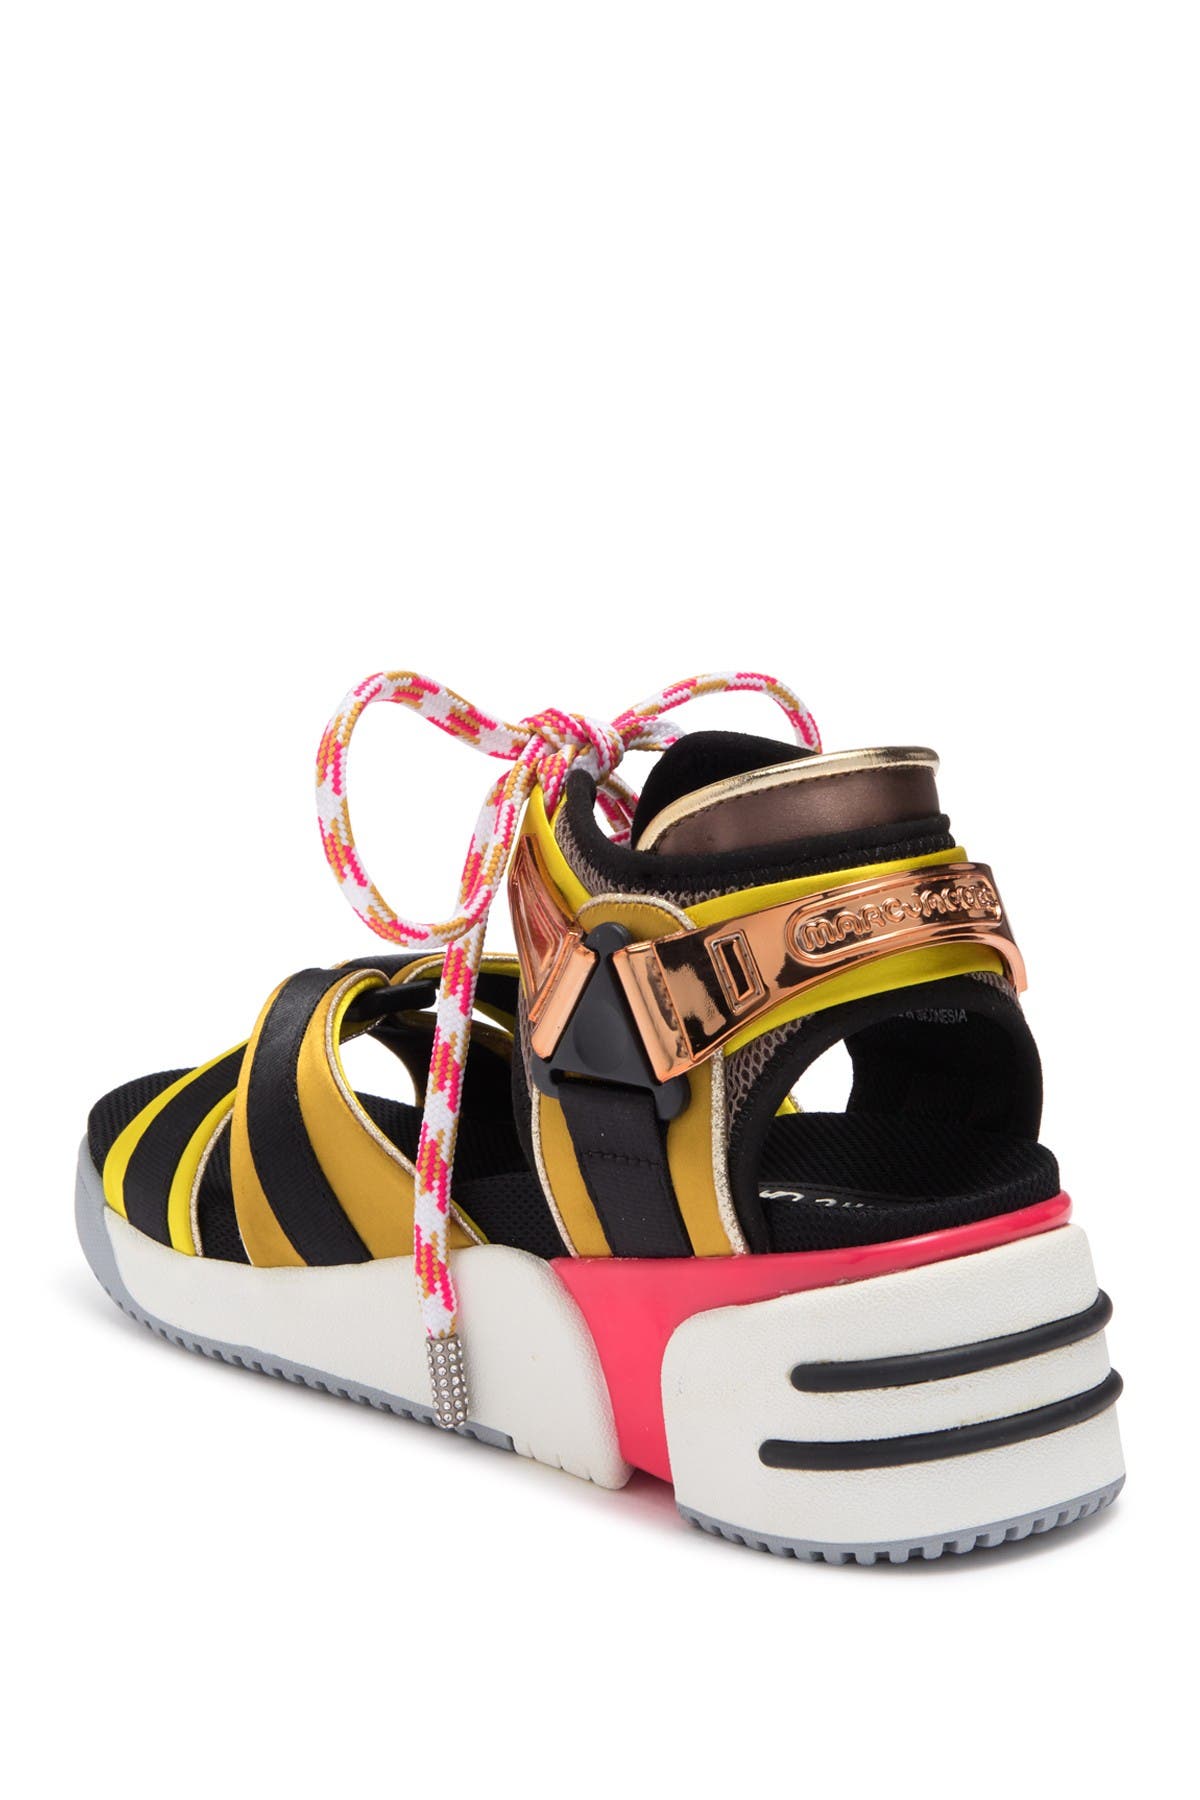 Marc Jacobs Somewhere Strappy Sport Sandal In Yellow Multi